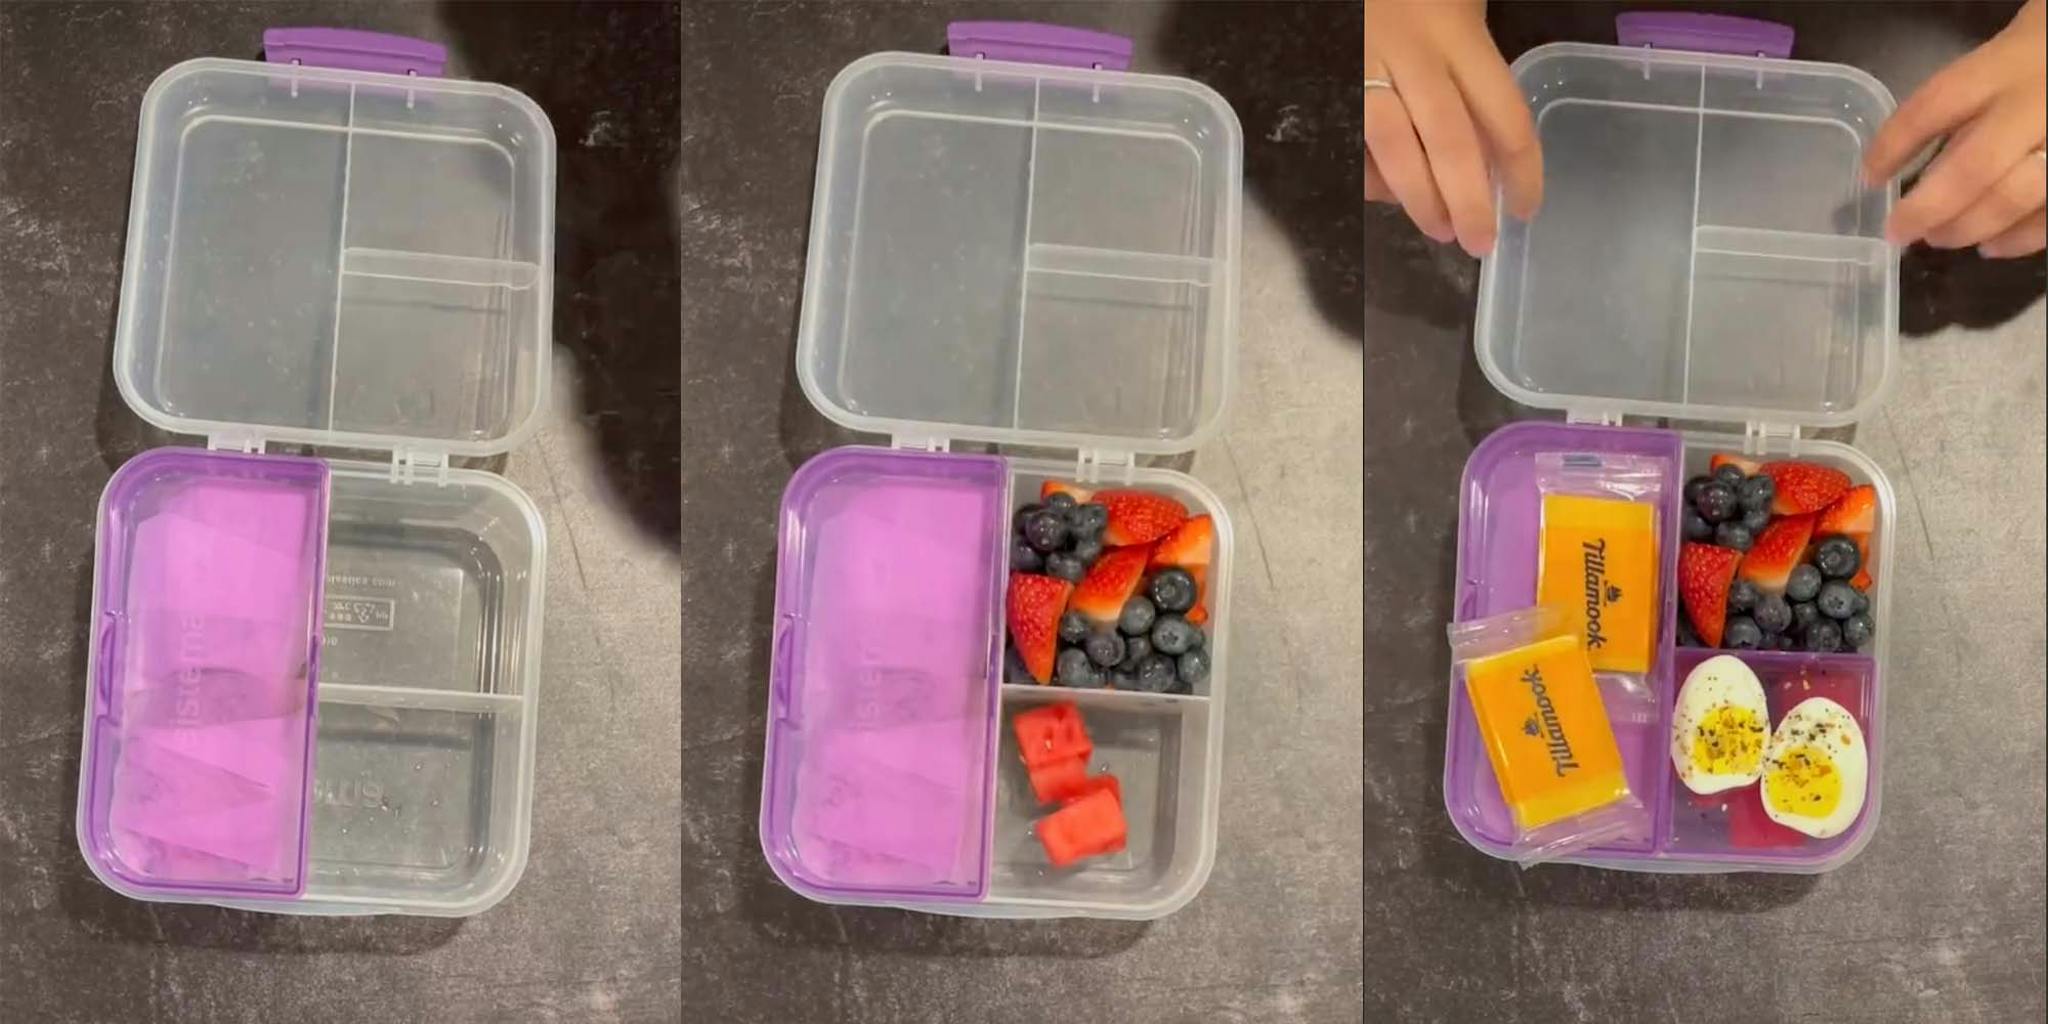 Influencer's Keto Lunchbox for Her Child Sparks Outrage on TikTok